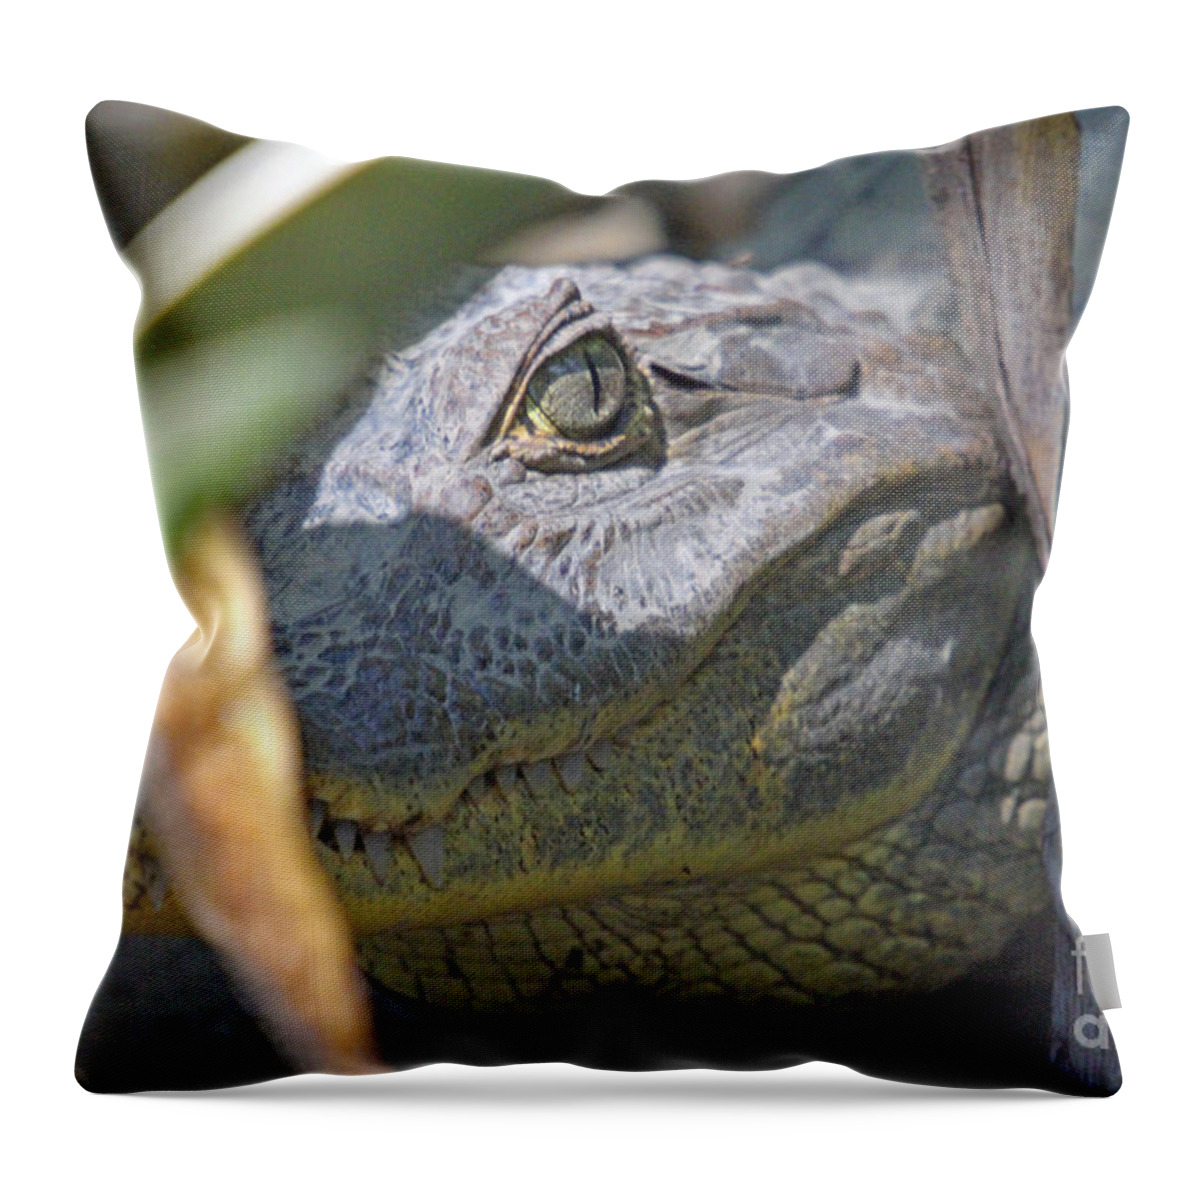 Costa Rica Throw Pillow featuring the photograph Eye of the Caiman by Bob Hislop